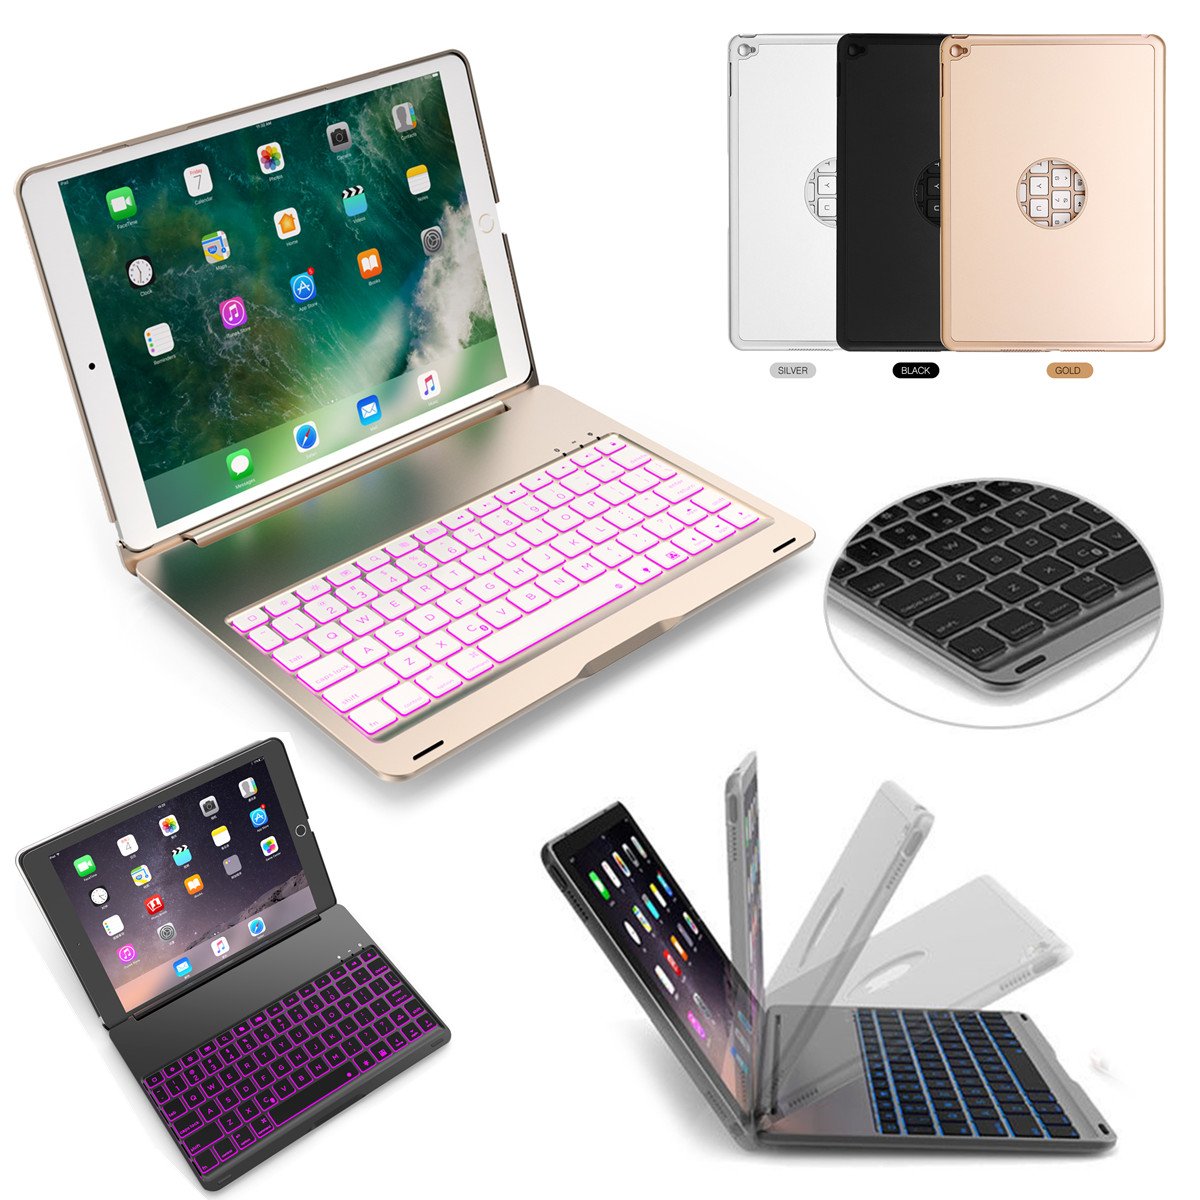 7 Colors Backlit Aluminum Alloy Wireless bluetooth Keyboard Case For iPad Air/iPad Air 2 1